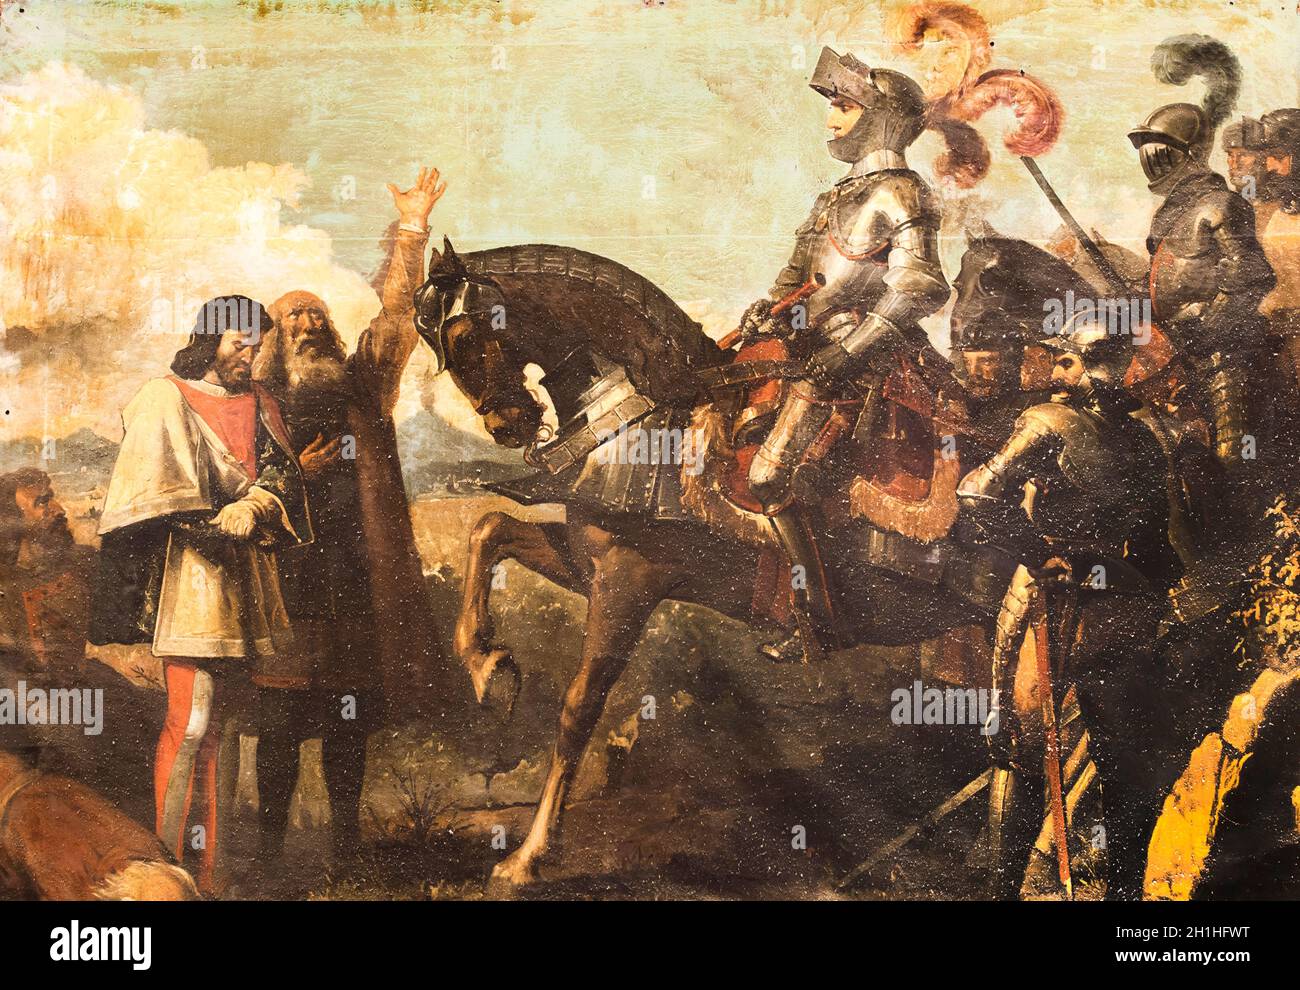 Gonzalo Fernandez de Cordoba, prays before the corpse of his adversary the Duke of Nemours, after Battle of Cerignola, 1503. Painted by Jose Maria Rod Stock Photo